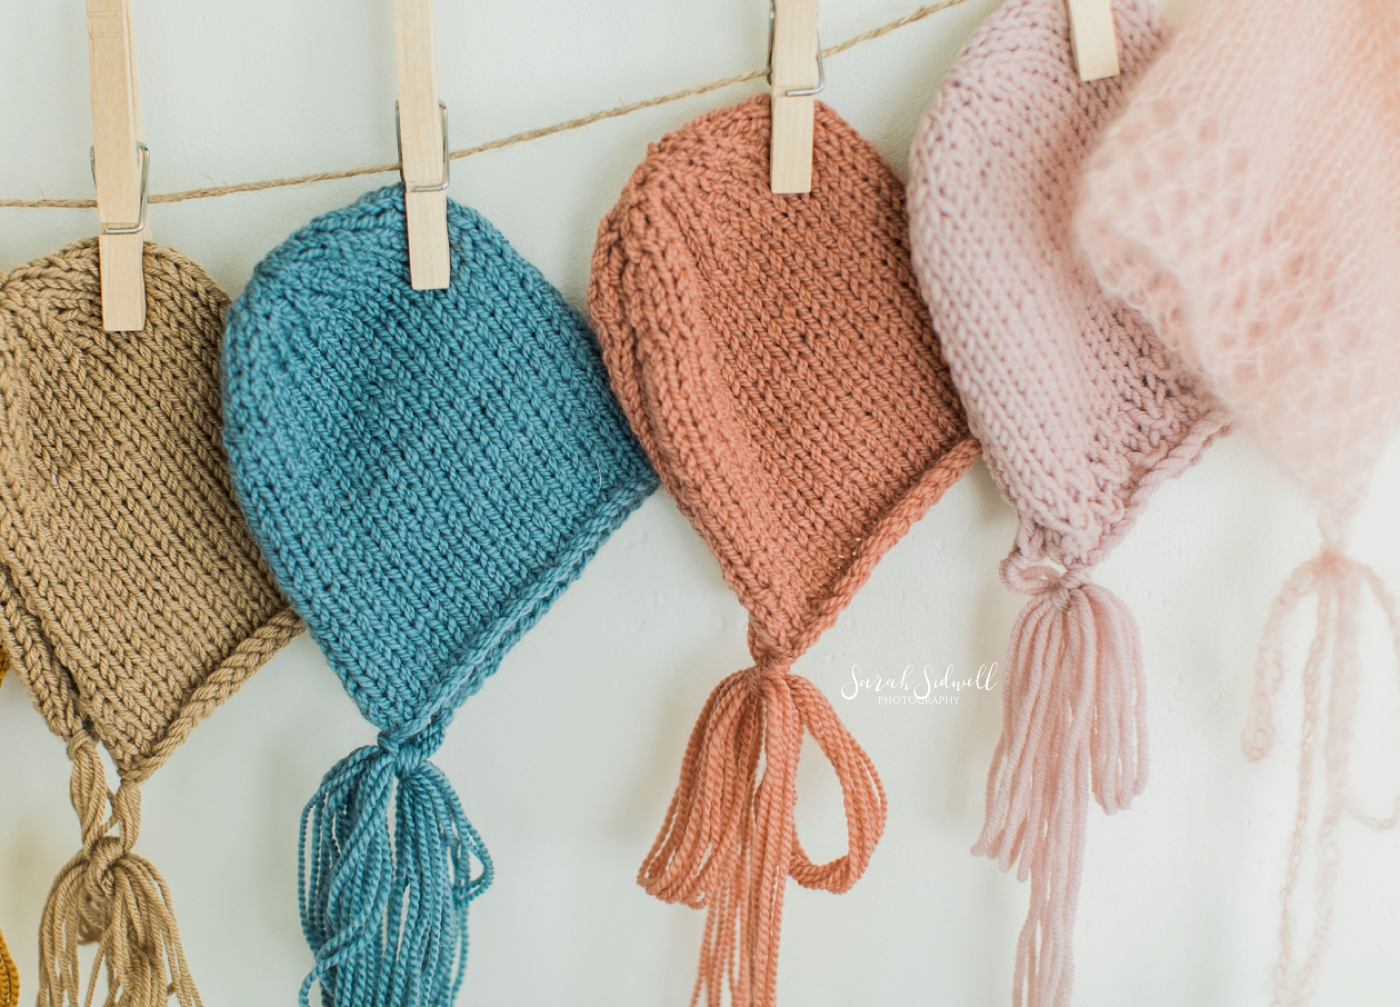 Knitted baby hats are pinned to a clothes line. 